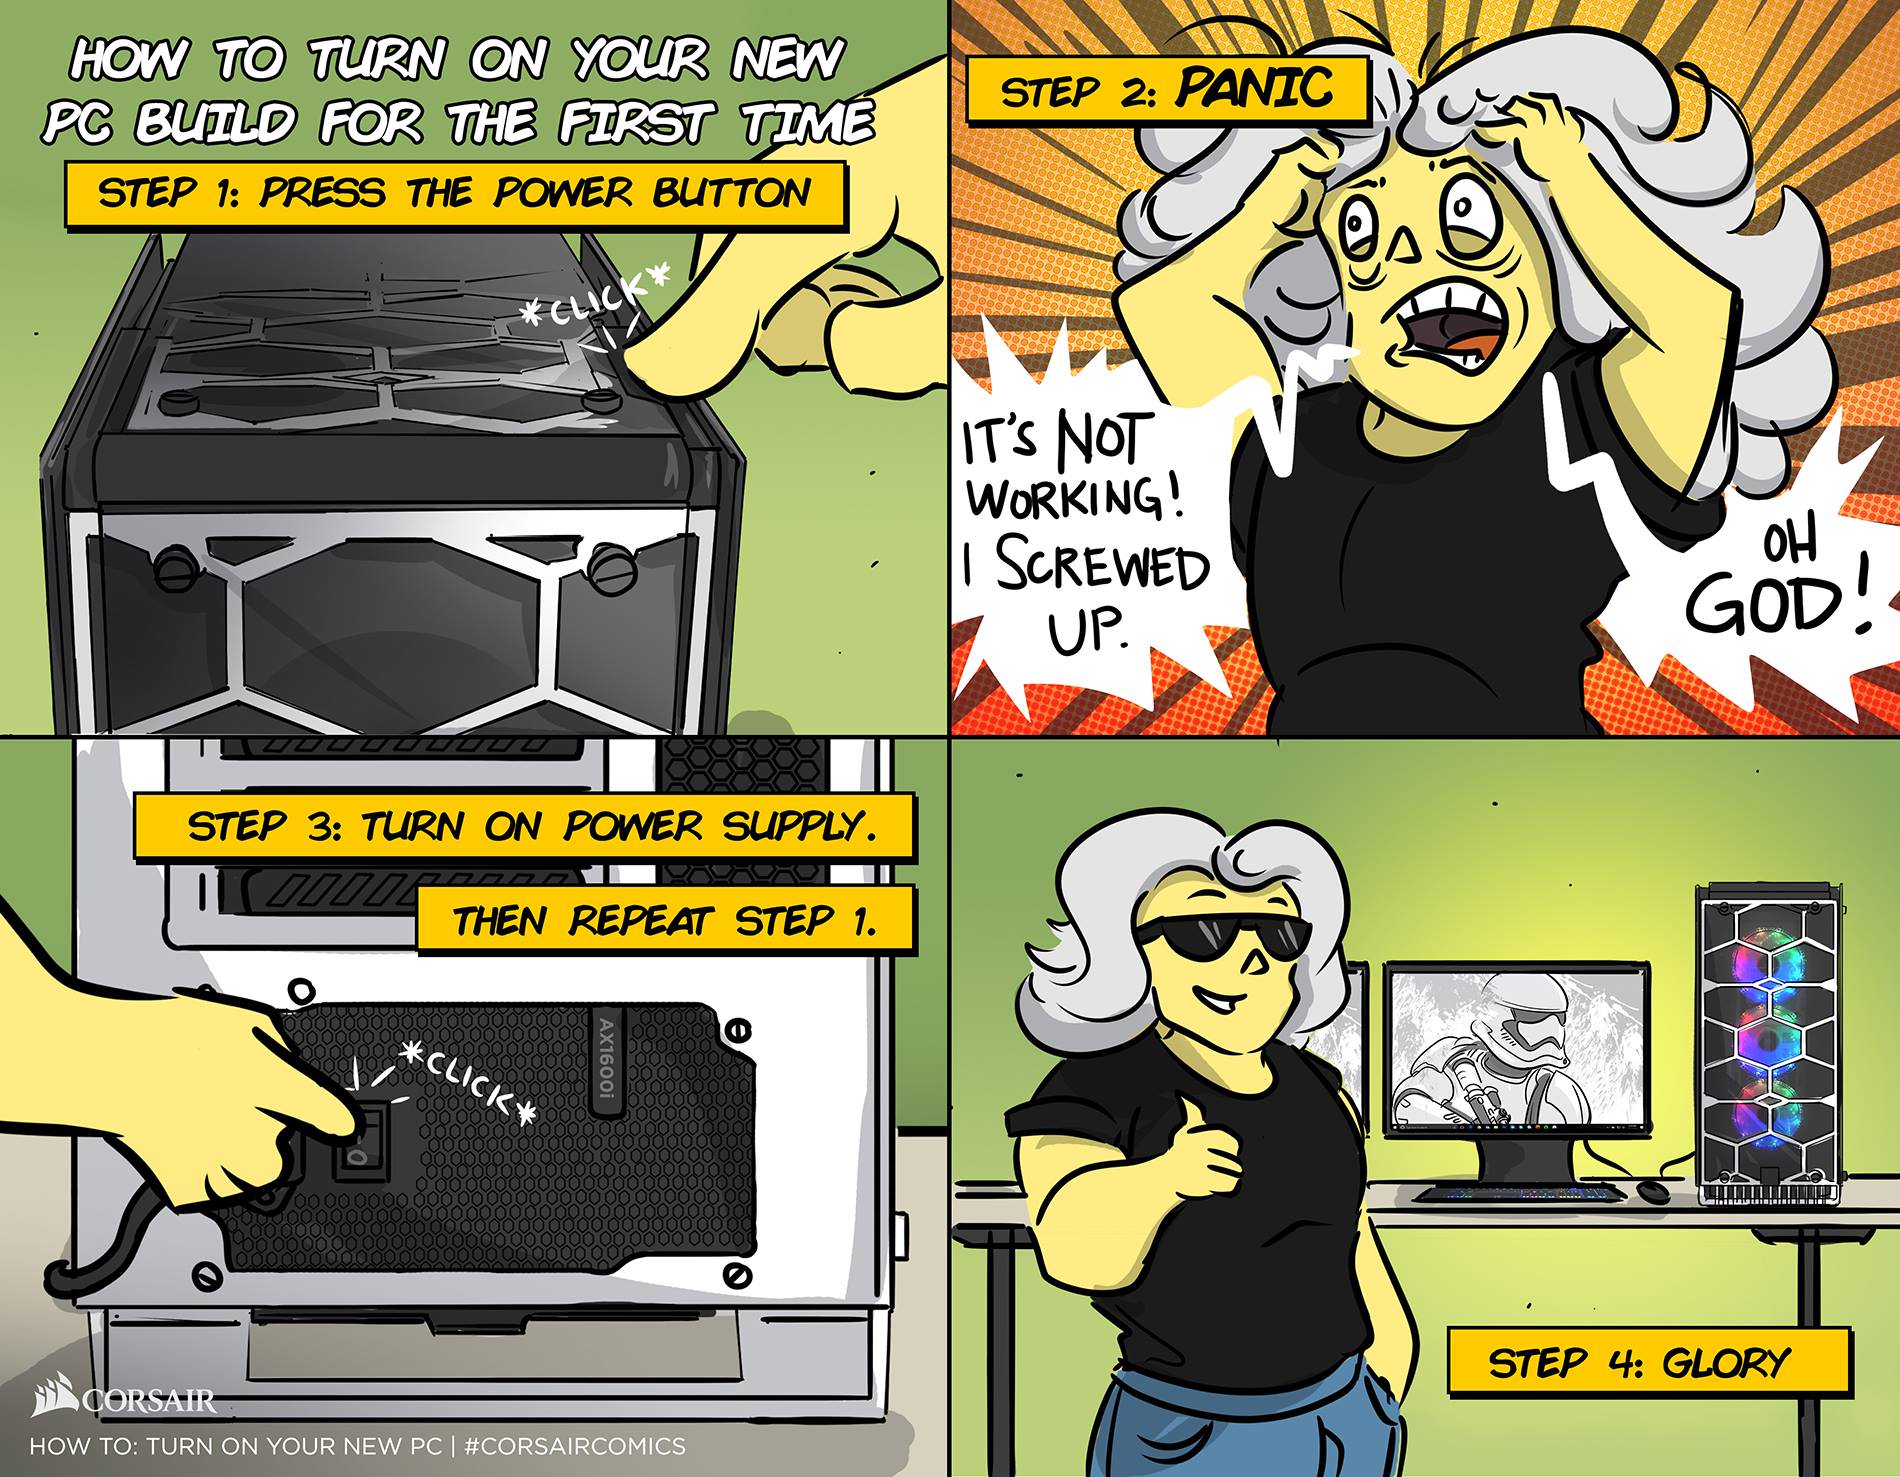 Stop GPU abuse and adopt a graphics Card..funny joke. | TechPowerUp Forums